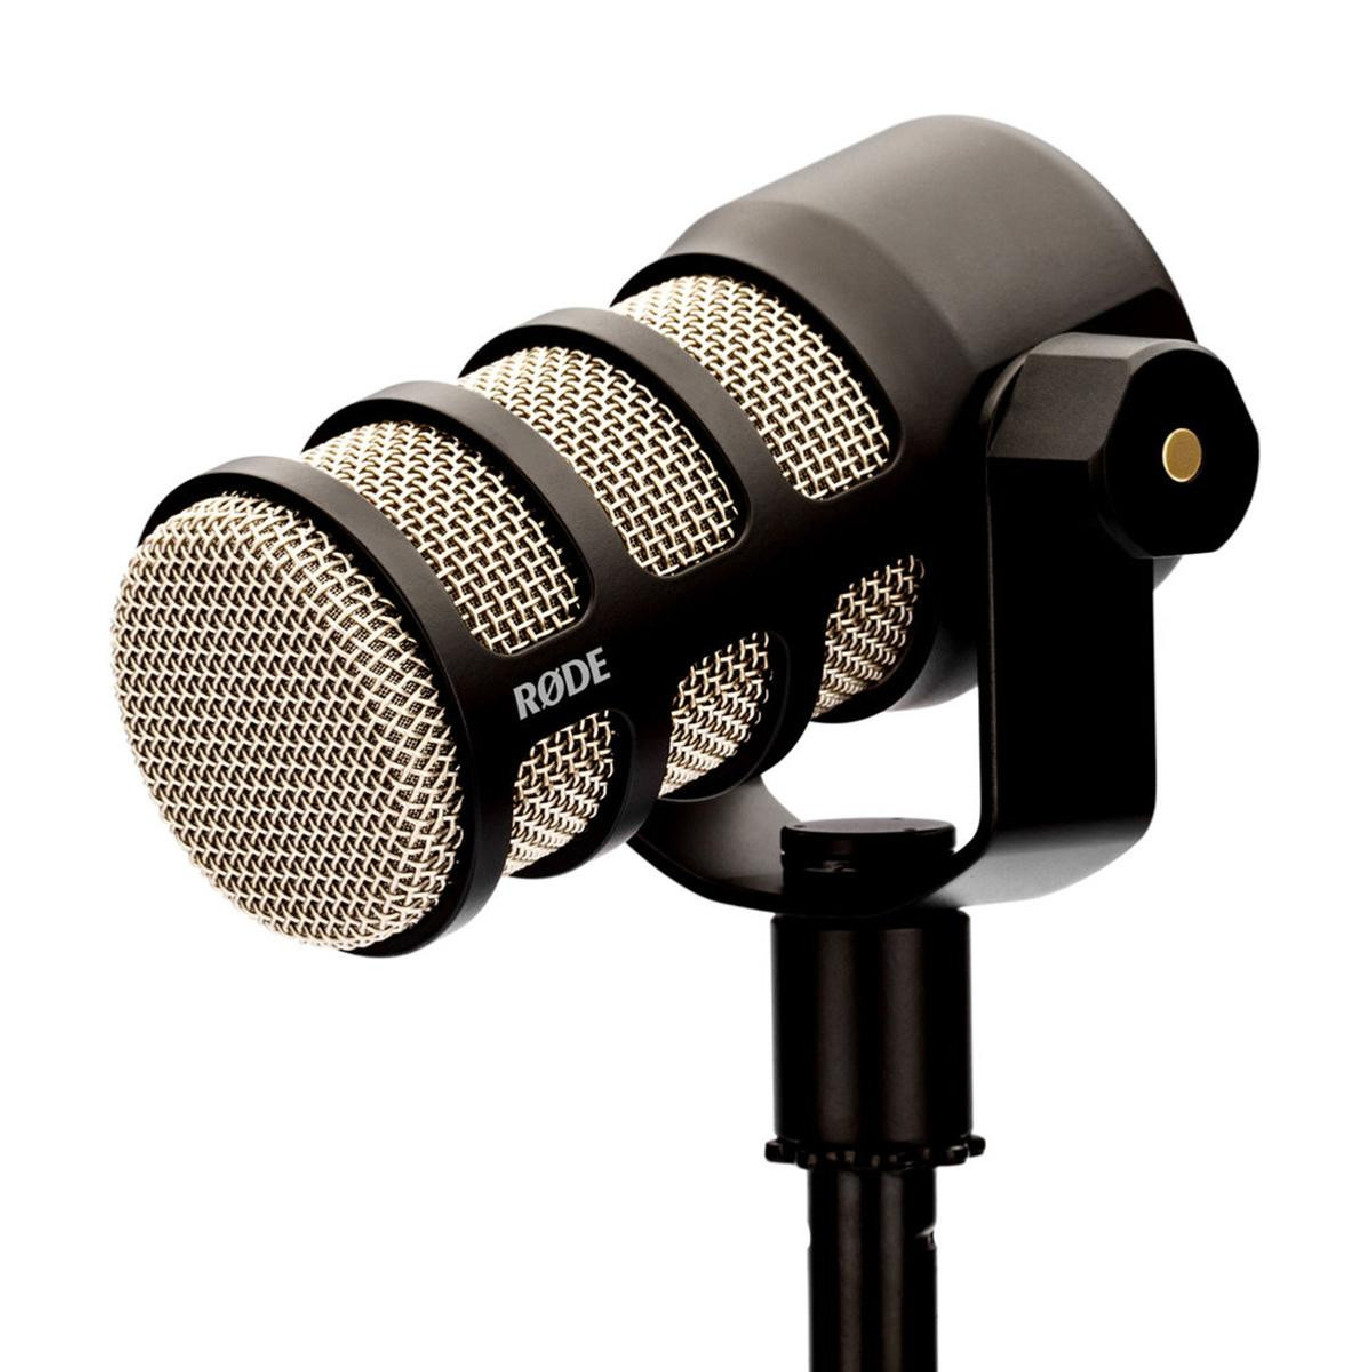 Rode Microphone Broadcast Podmic - Prophot